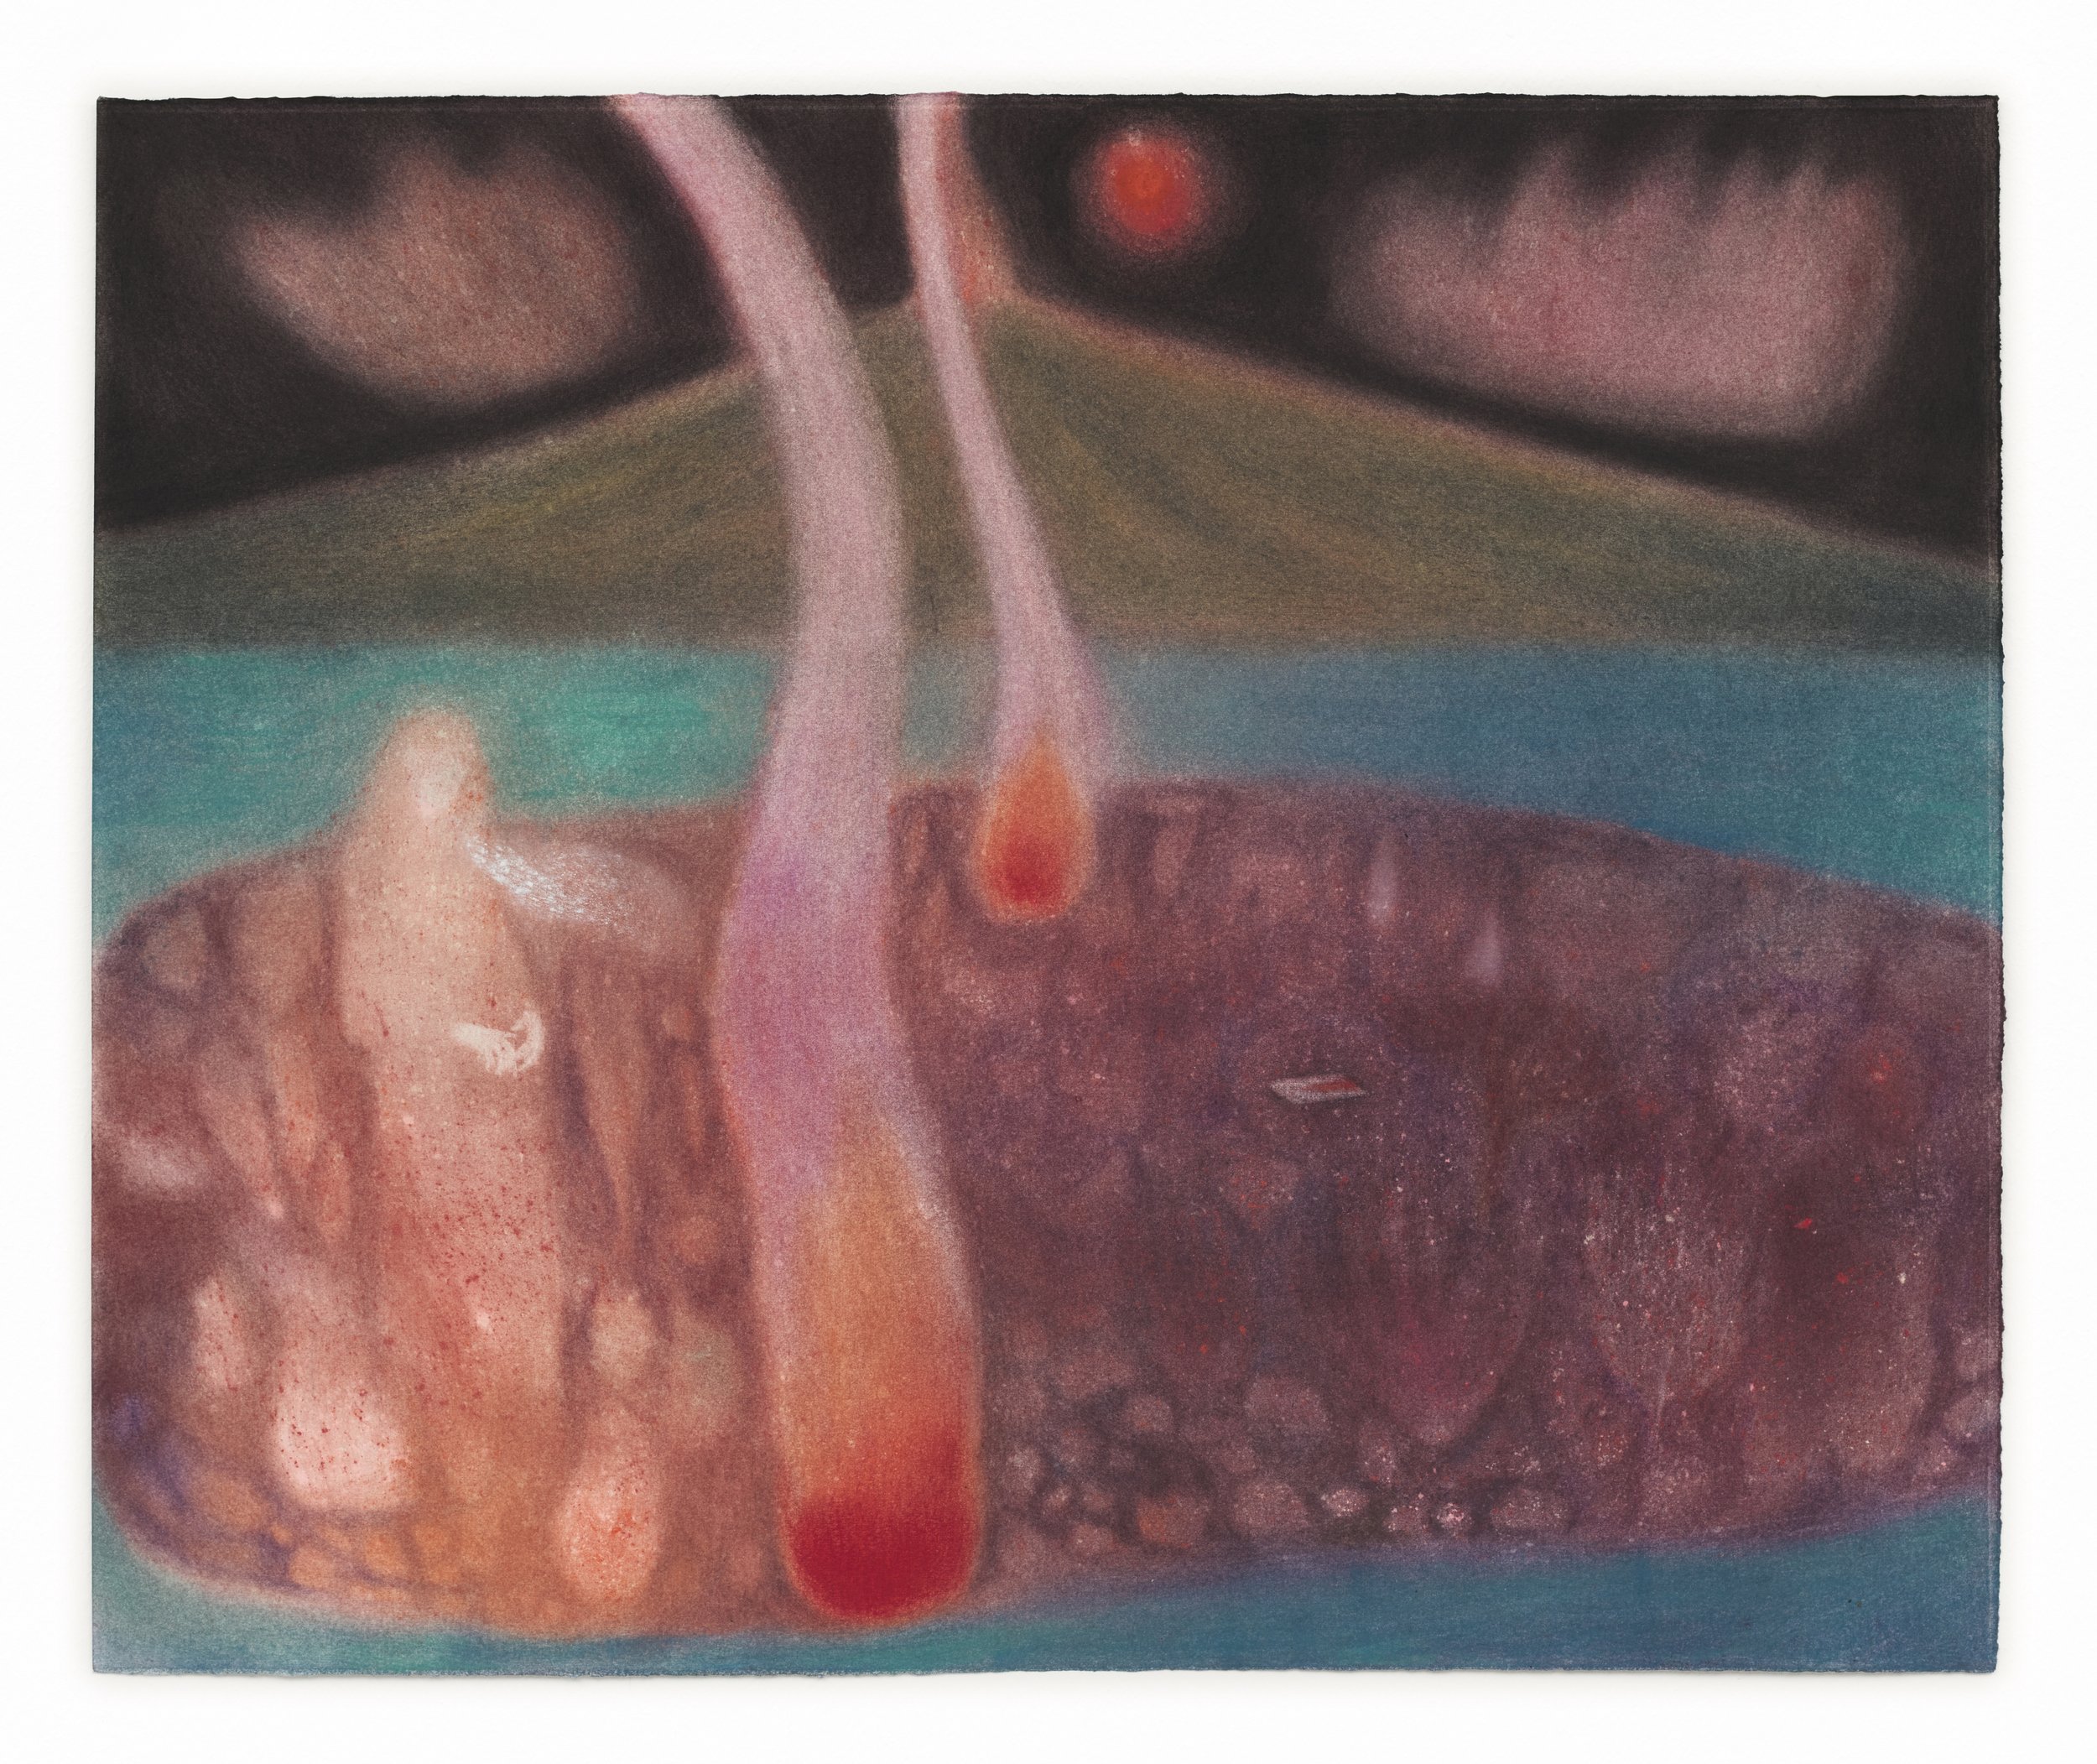  Mary Herbert  The Island , 2021 Soft pastel on paper 19 x 21 5/8 x 1 1/2 inches (framed) 